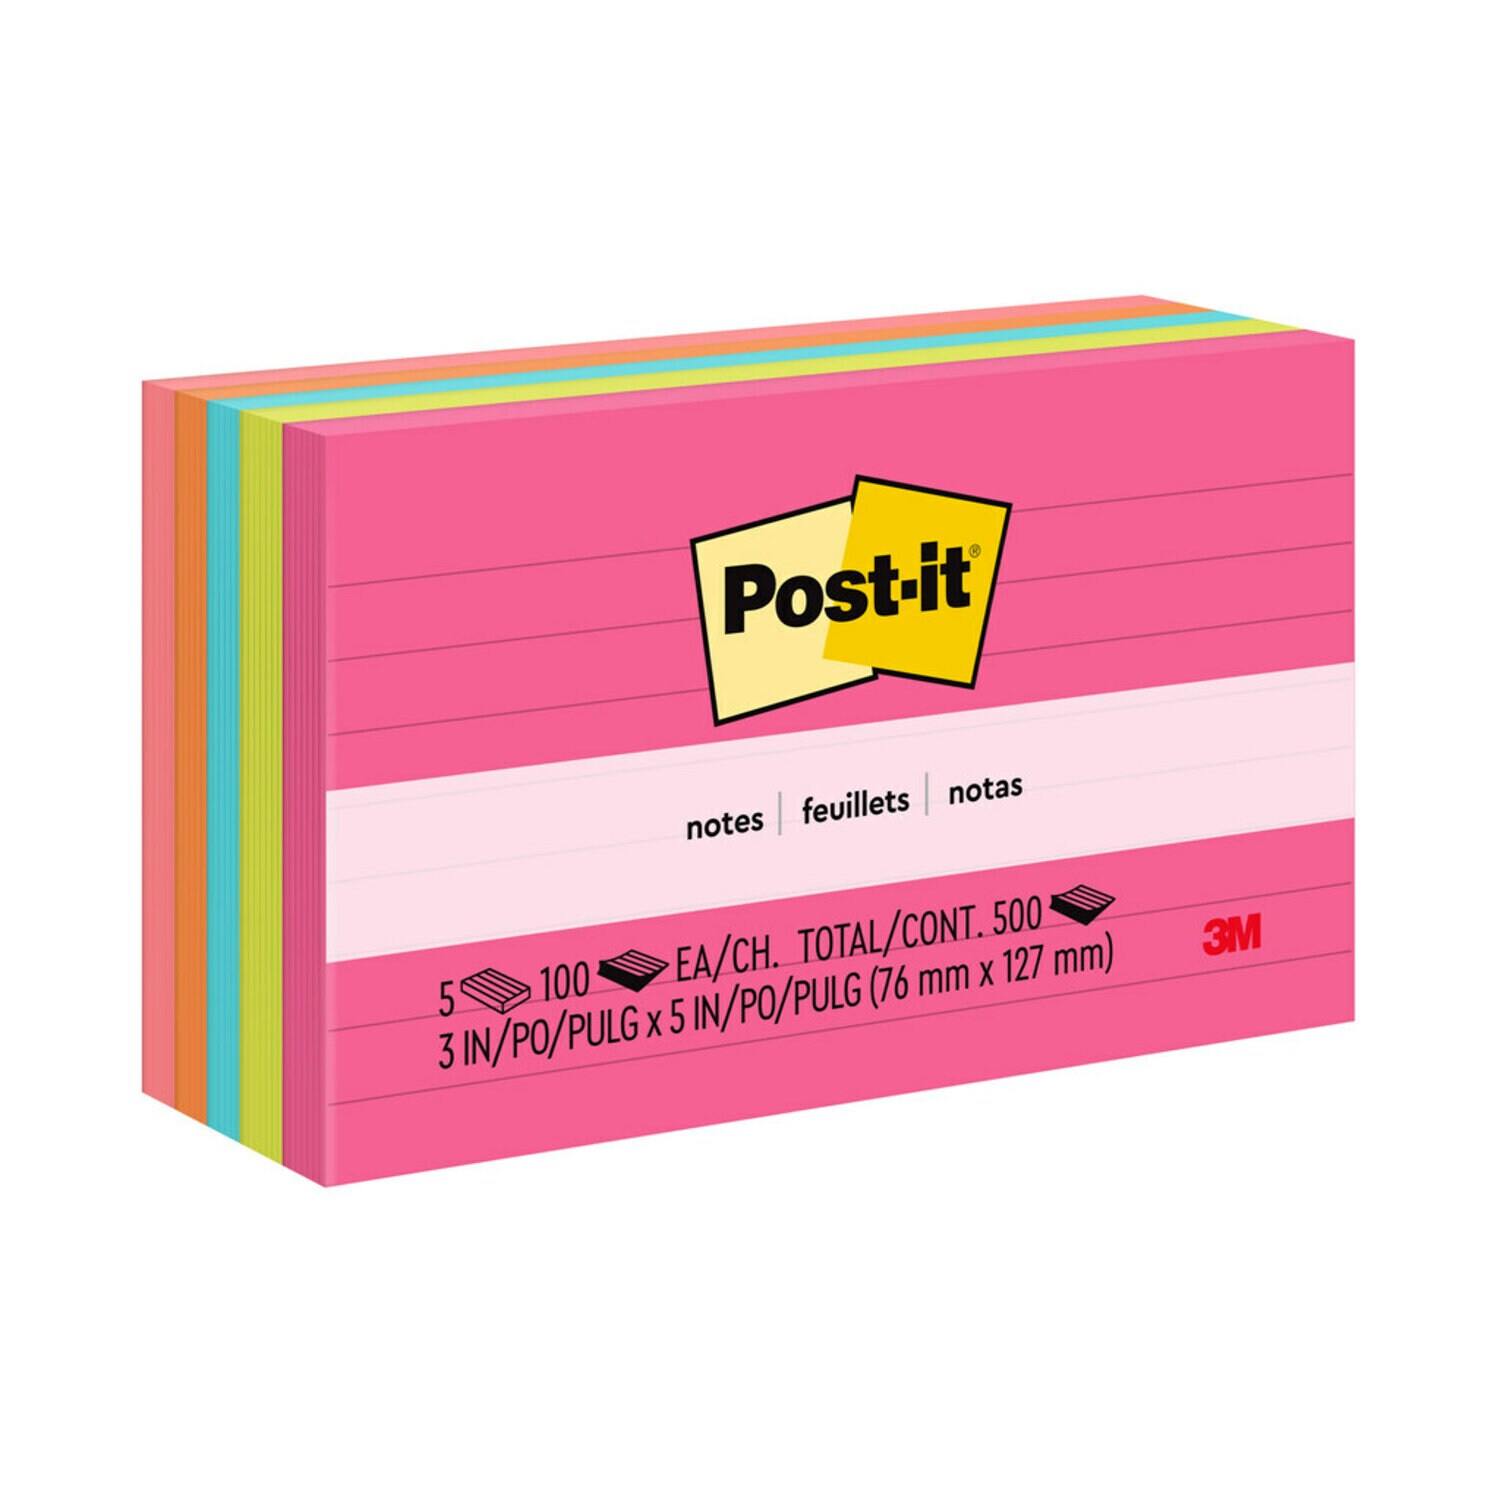 7100243769 - 635-5AN Post-it Notes, 3 in x 5 in (76 mm x 127 mm) Capetown Colors, Lined